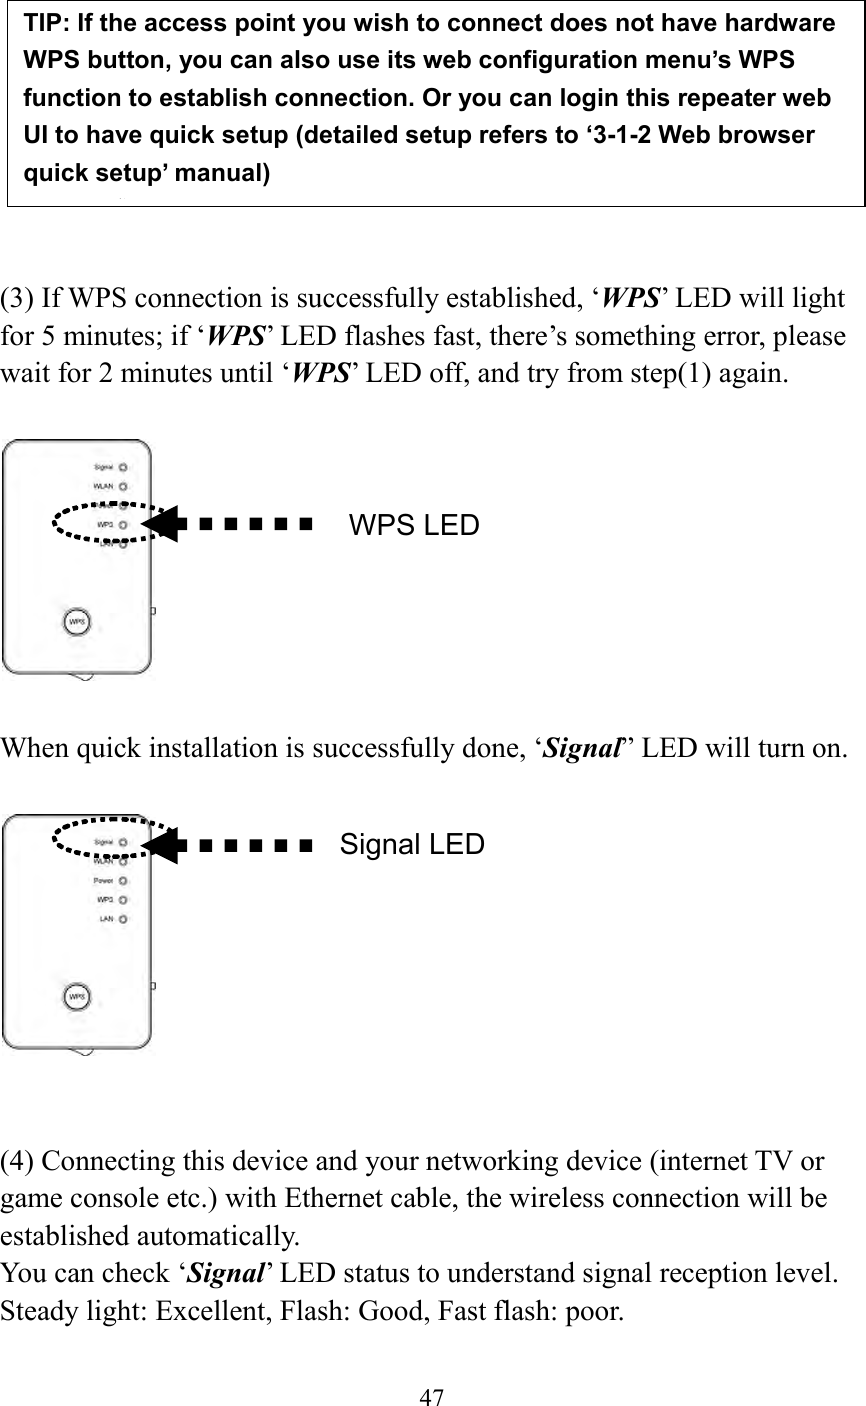  47           (3) If WPS connection is successfully established, ‘WPS’ LED will light for 5 minutes; if ‘WPS’ LED flashes fast, there’s something error, please wait for 2 minutes until ‘WPS’ LED off, and try from step(1) again.      When quick installation is successfully done, ‘Signal” LED will turn on.     (4) Connecting this device and your networking device (internet TV or game console etc.) with Ethernet cable, the wireless connection will be established automatically.   You can check ‘Signal’ LED status to understand signal reception level.   Steady light: Excellent, Flash: Good, Fast flash: poor.  TIP: If the access point you wish to connect does not have hardware WPS button, you can also use its web configuration menu’s WPS function to establish connection. Or you can login this repeater web UI to have quick setup (detailed setup refers to ‘3-1-2 Web browser quick setup’ manual)   manual)  WPS LED Signal LED 